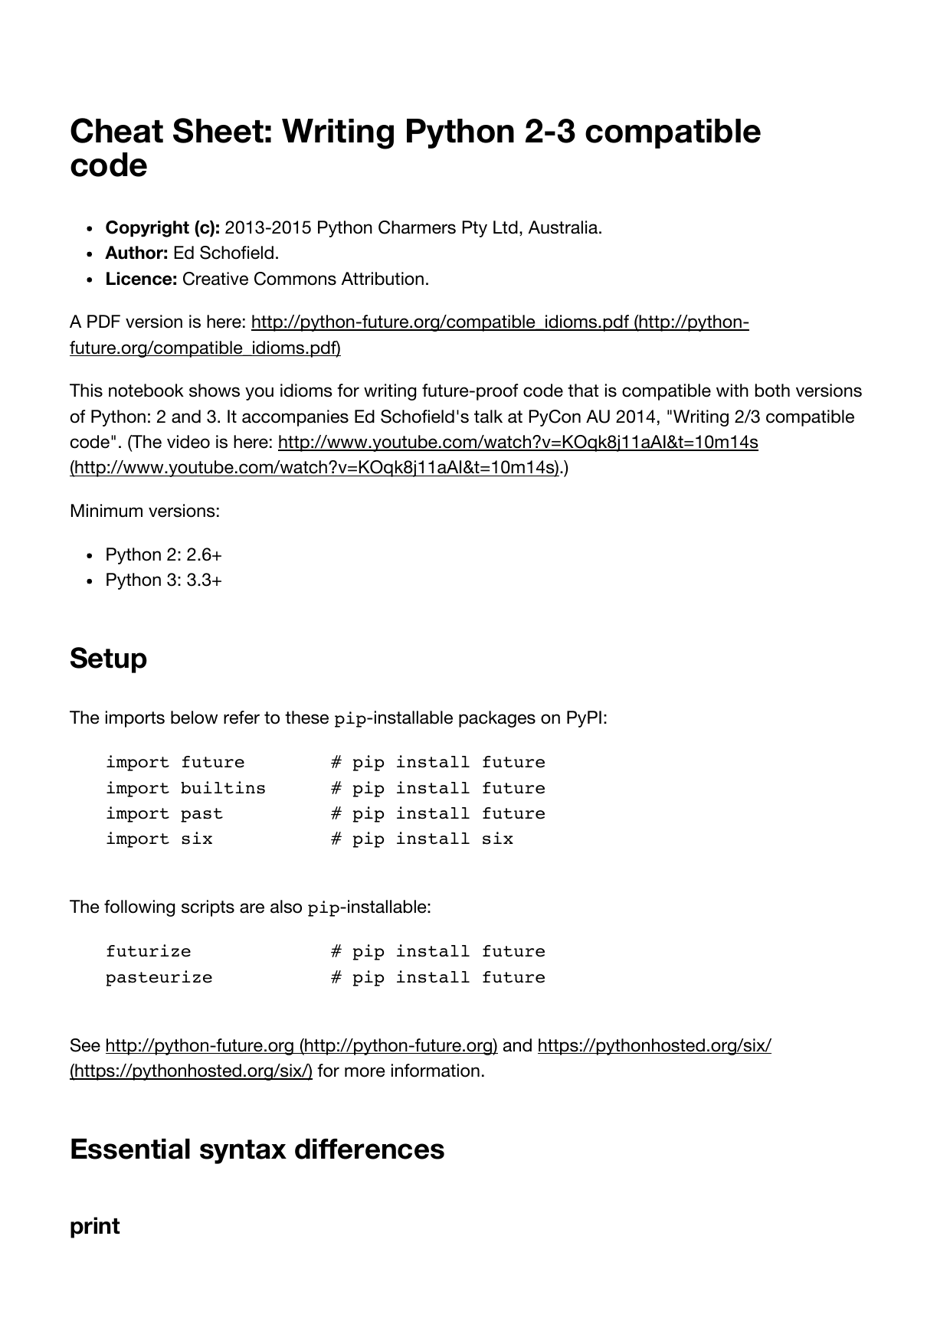 Preview of Python Cheat Sheet - Writing Python 2-3 Compatible Code